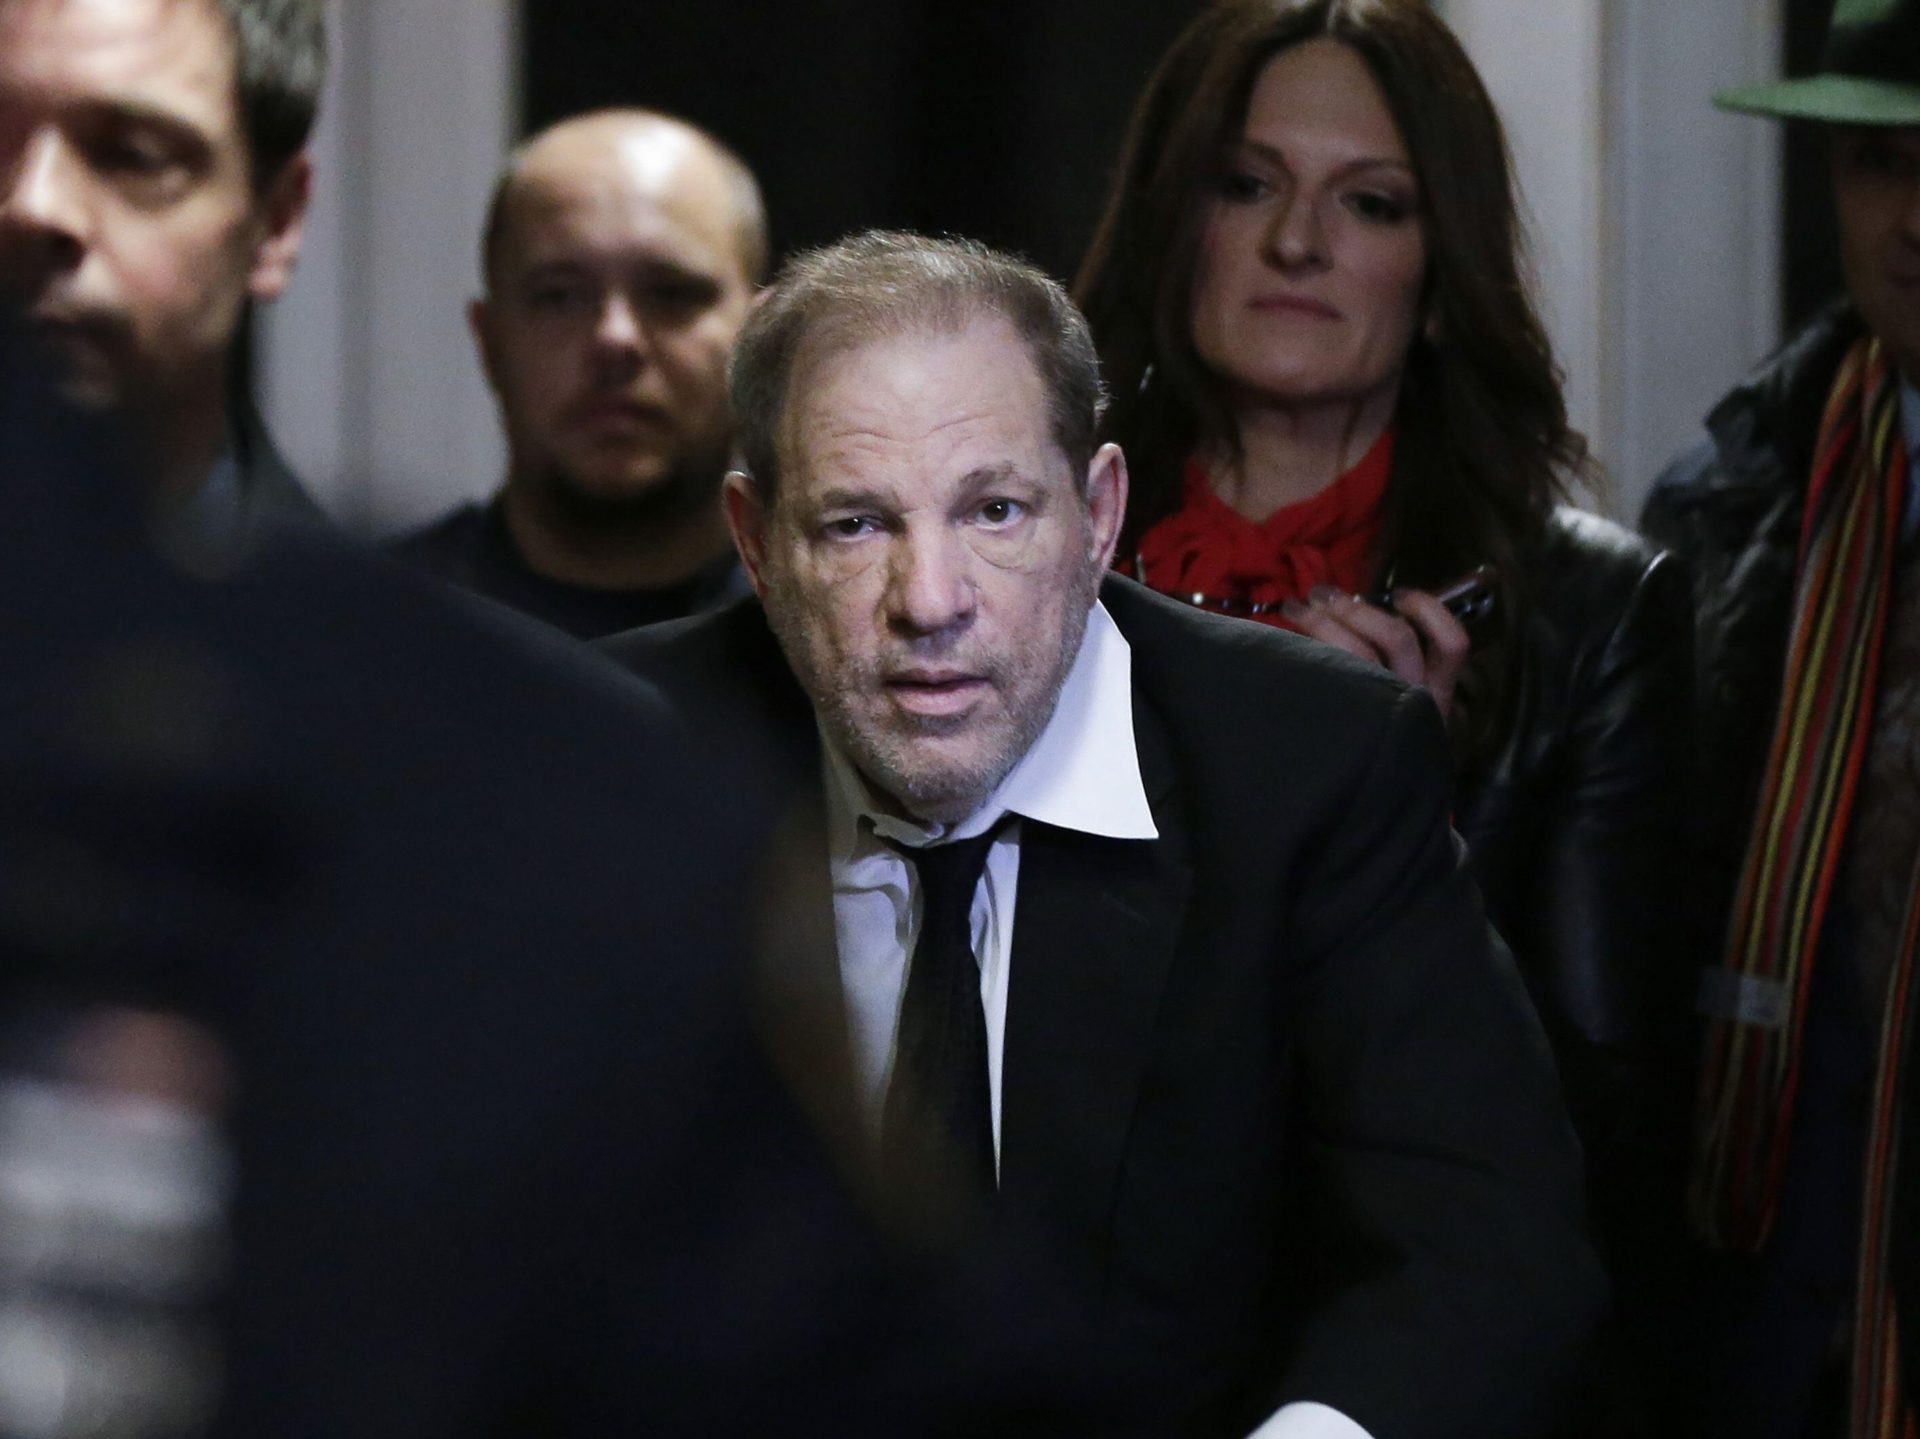 Harvey Weinstein exits a Manhattan court on January 10th 2020 in New York City.